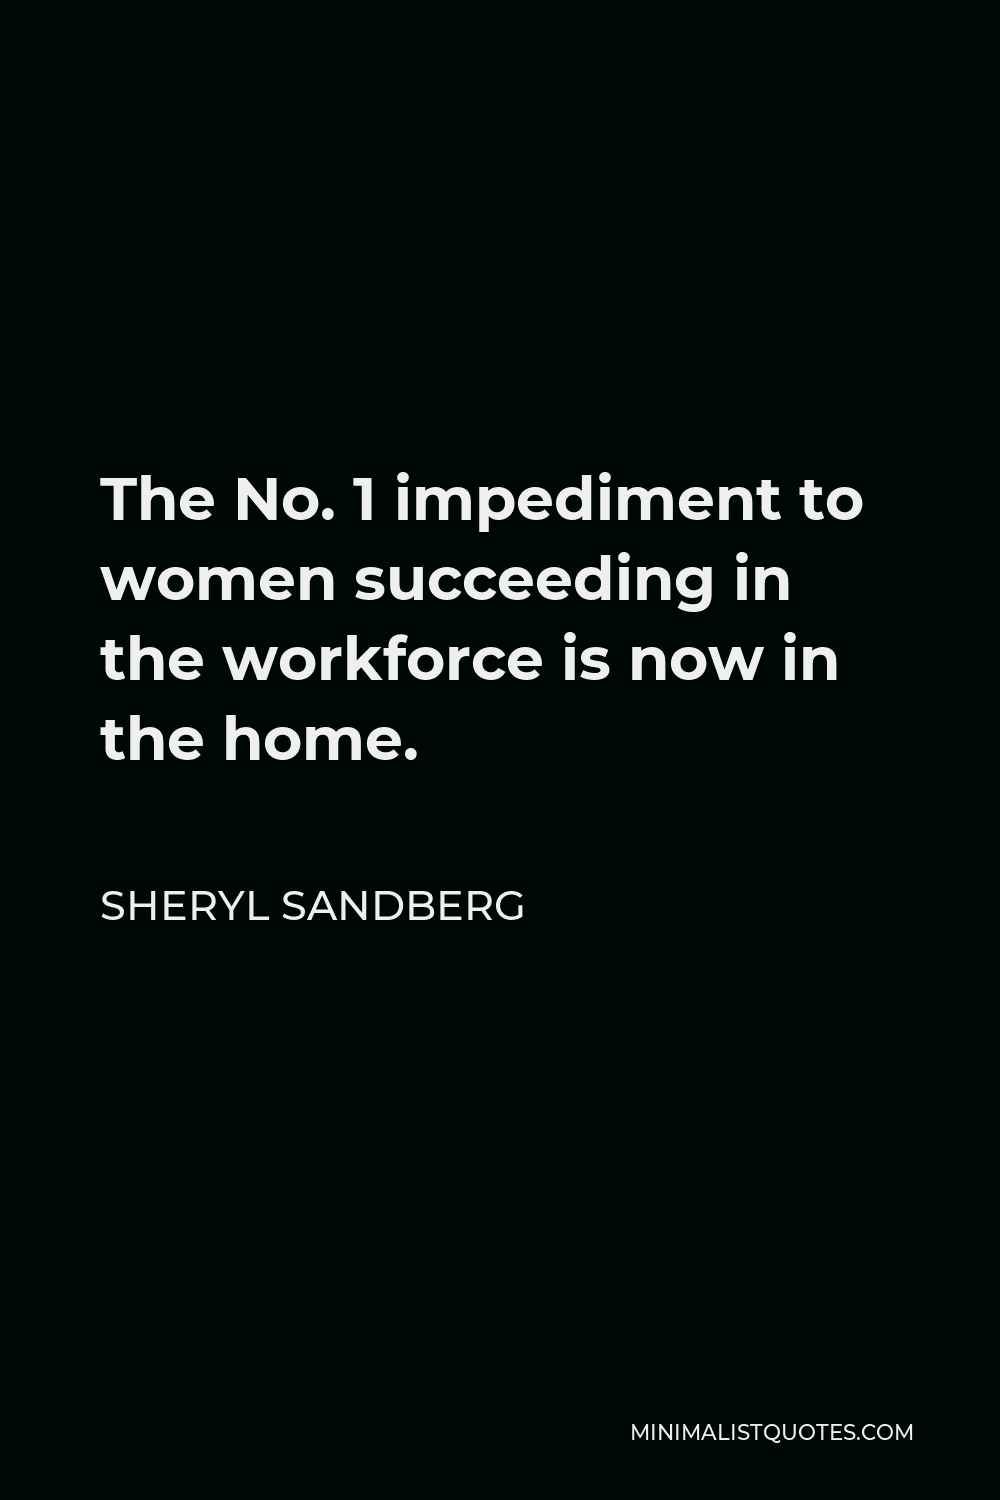 Sheryl Sandberg Quote: The No. 1 impediment to women succeeding in the ...